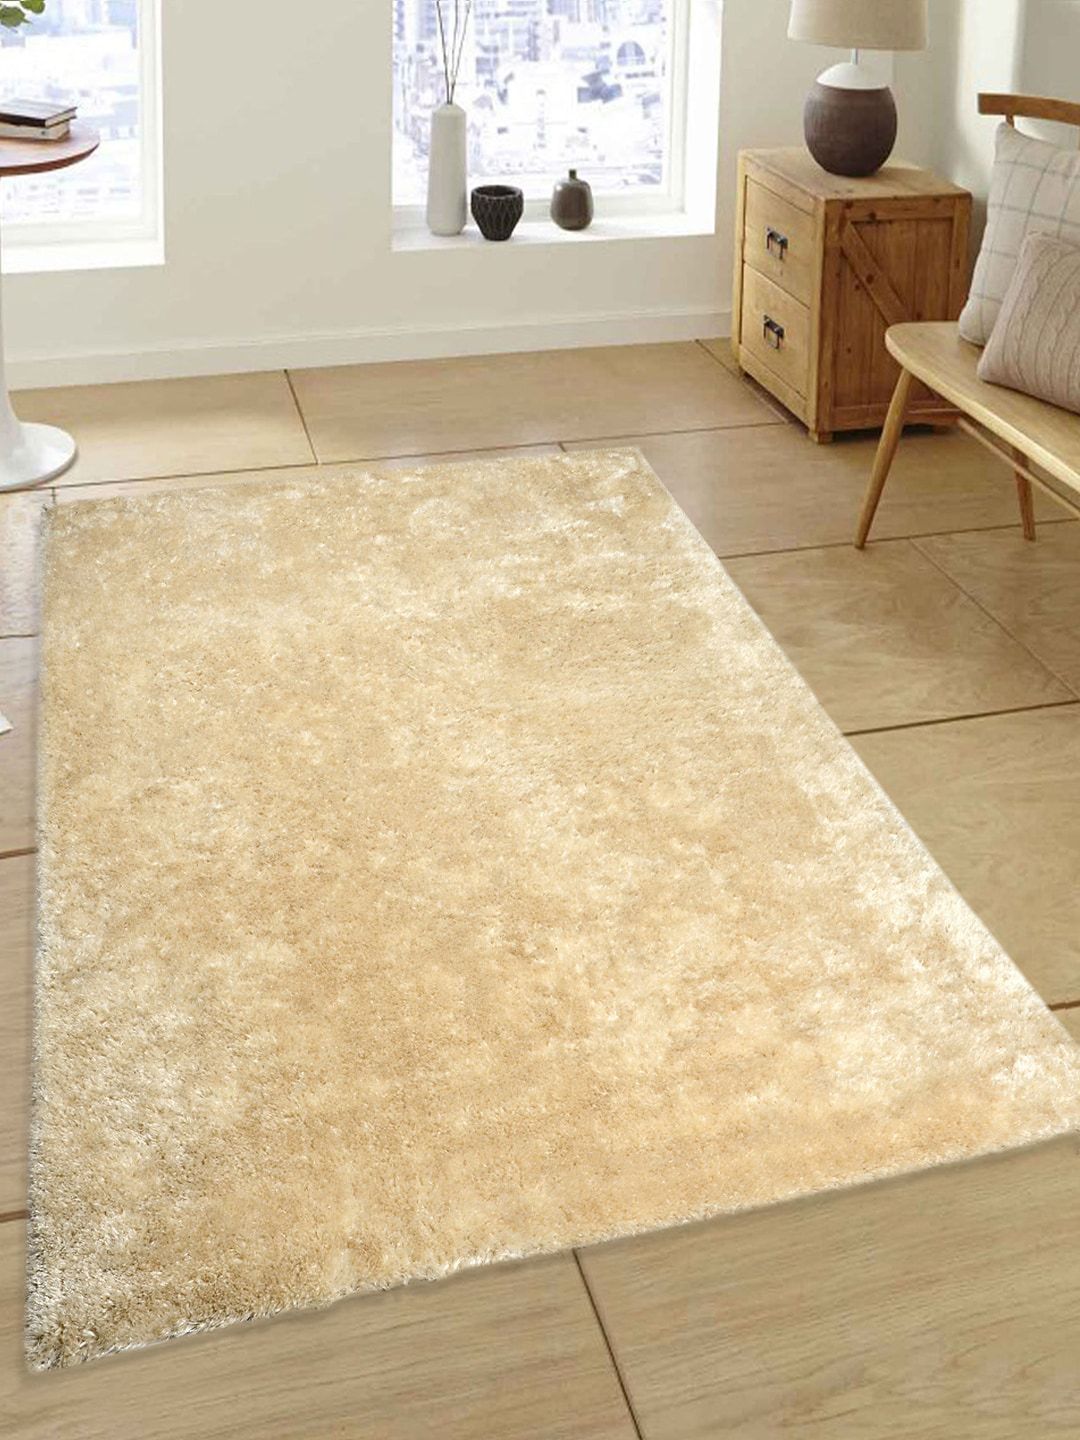 Saral Home Cream-Coloured Solid Cotton Shaggy Carpet Price in India